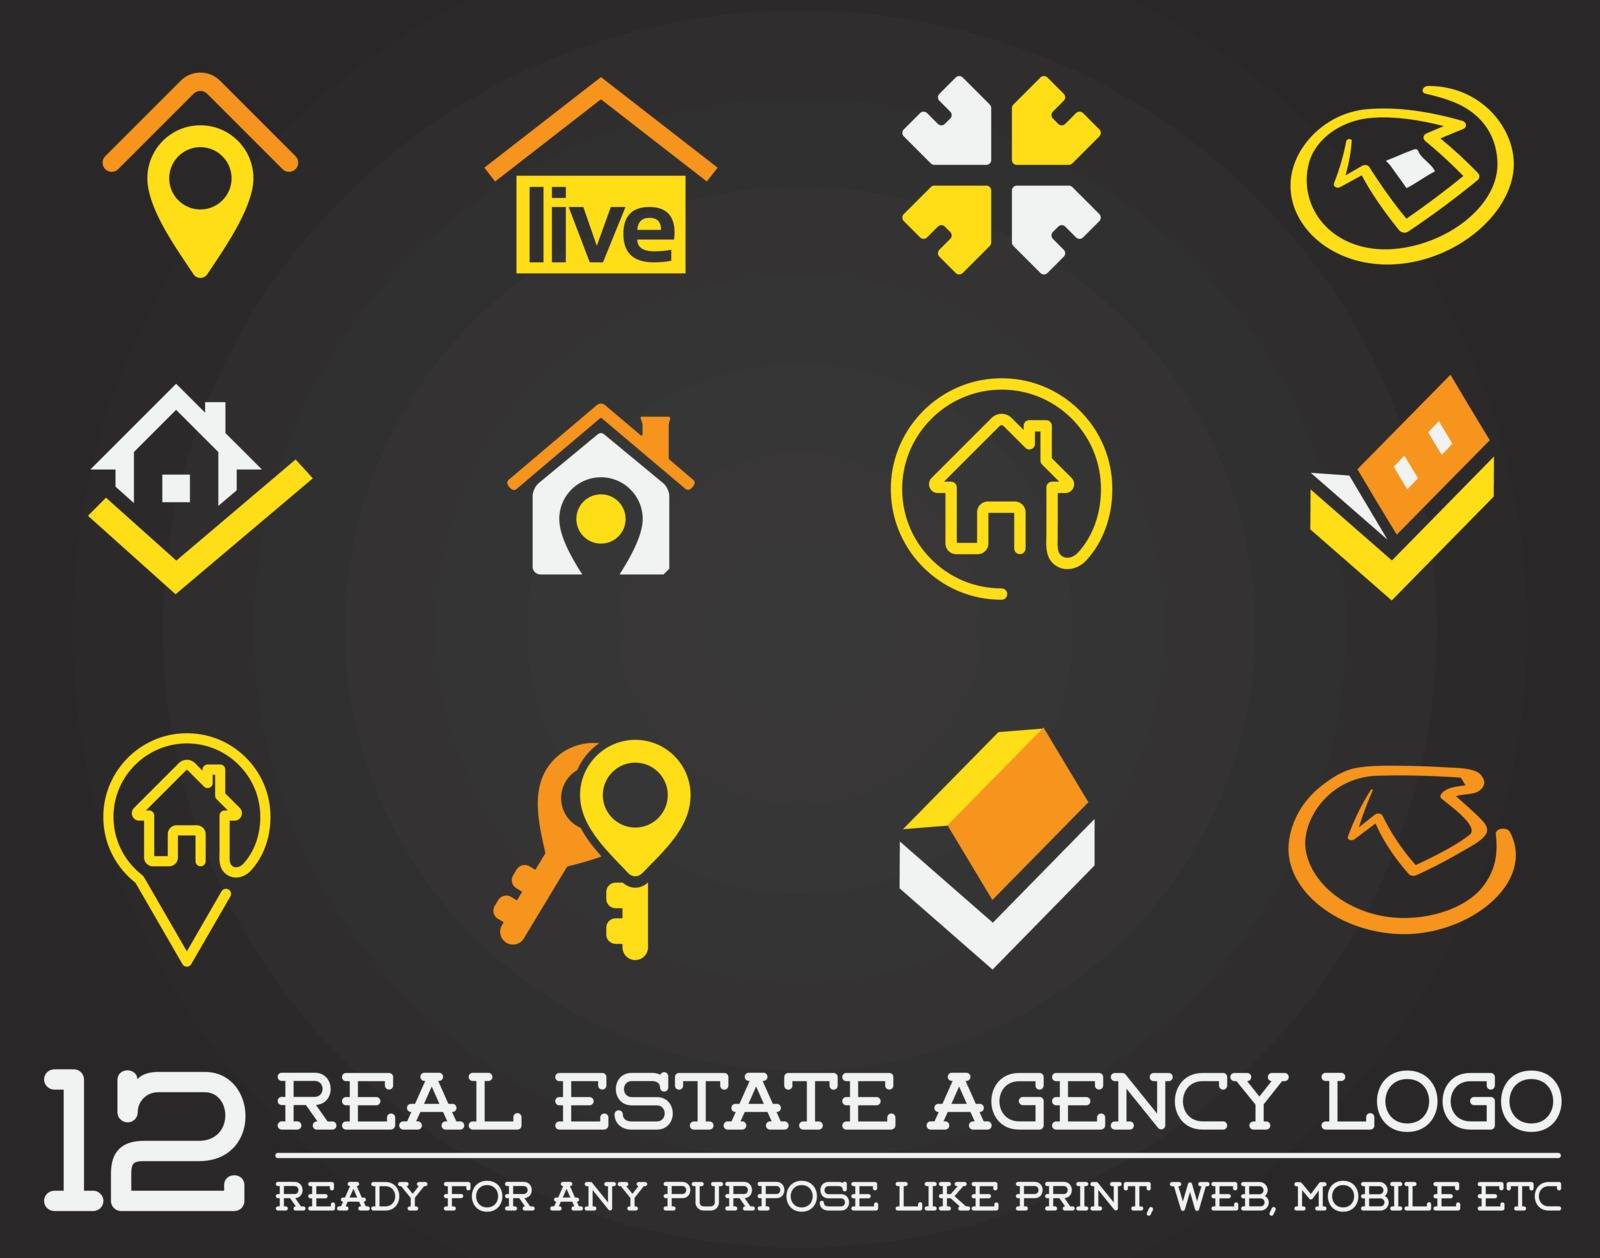 Set of Template logo for real estate agency or cottage town elit by ckybes